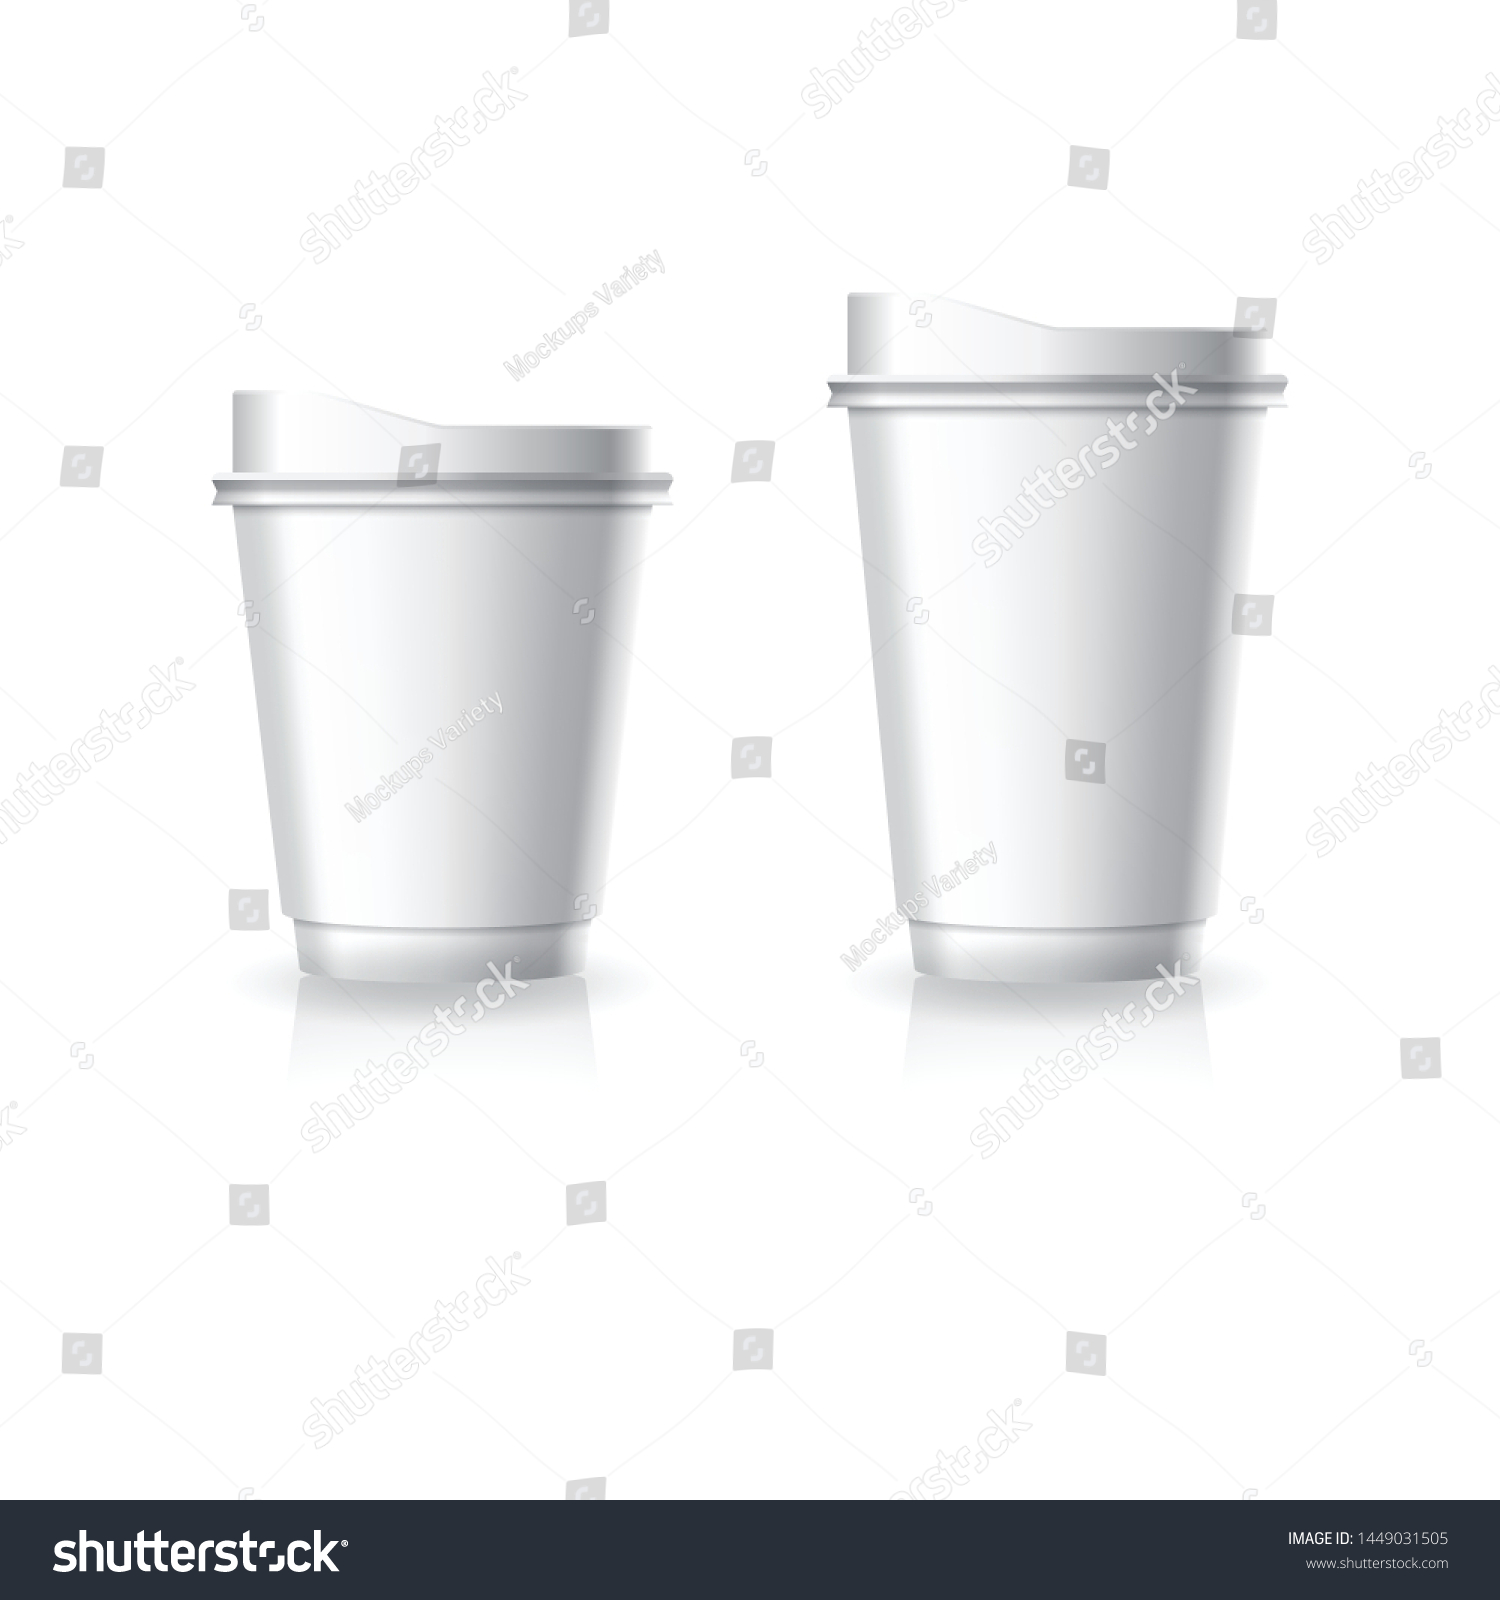 SVG of Blank white paper-plastic coffee-tea cup with white lid in small and medium size mockup template. Isolated on white background with shadow. Ready to use for brand design. Vector illustration. svg